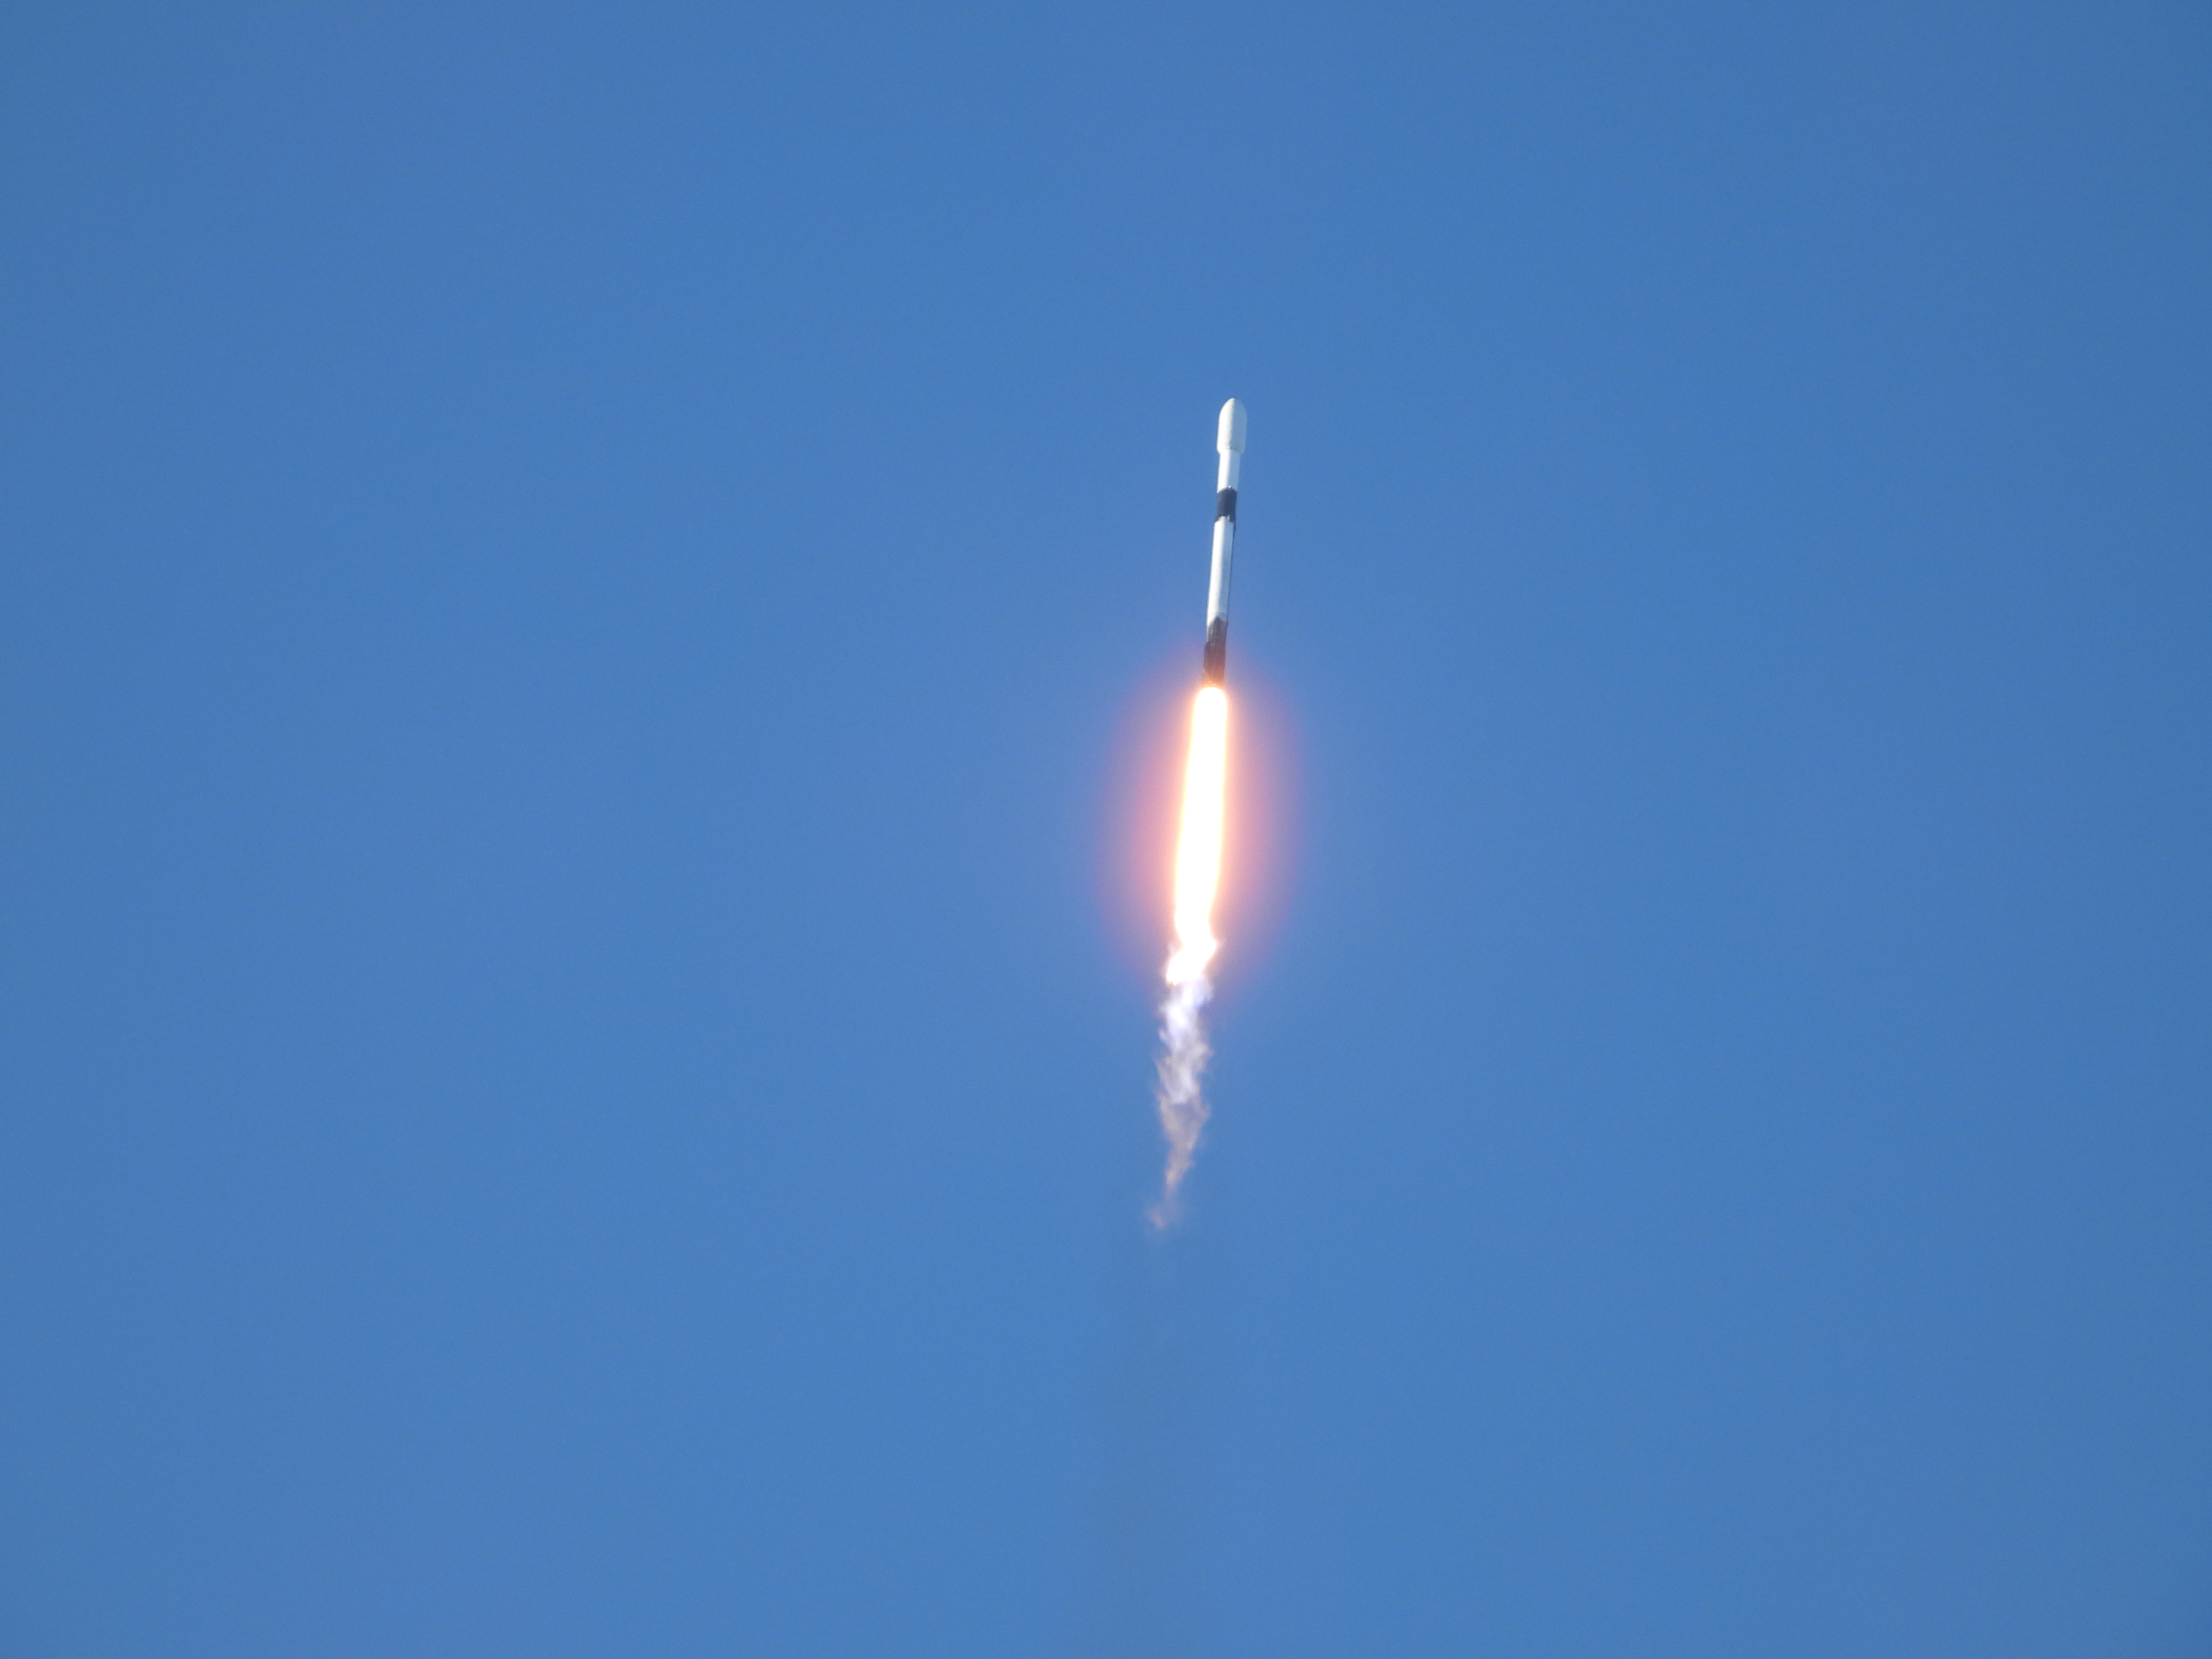 The SpaceX Falcon 9 rocket carrying the nation's first lunar orbiter Danuri on Aug. 5 at 8:08 a.m. is launched from Cape Canaveral Space Force Base in Cape Canaveral, Florida. (Korea Aerospace Research Institute)